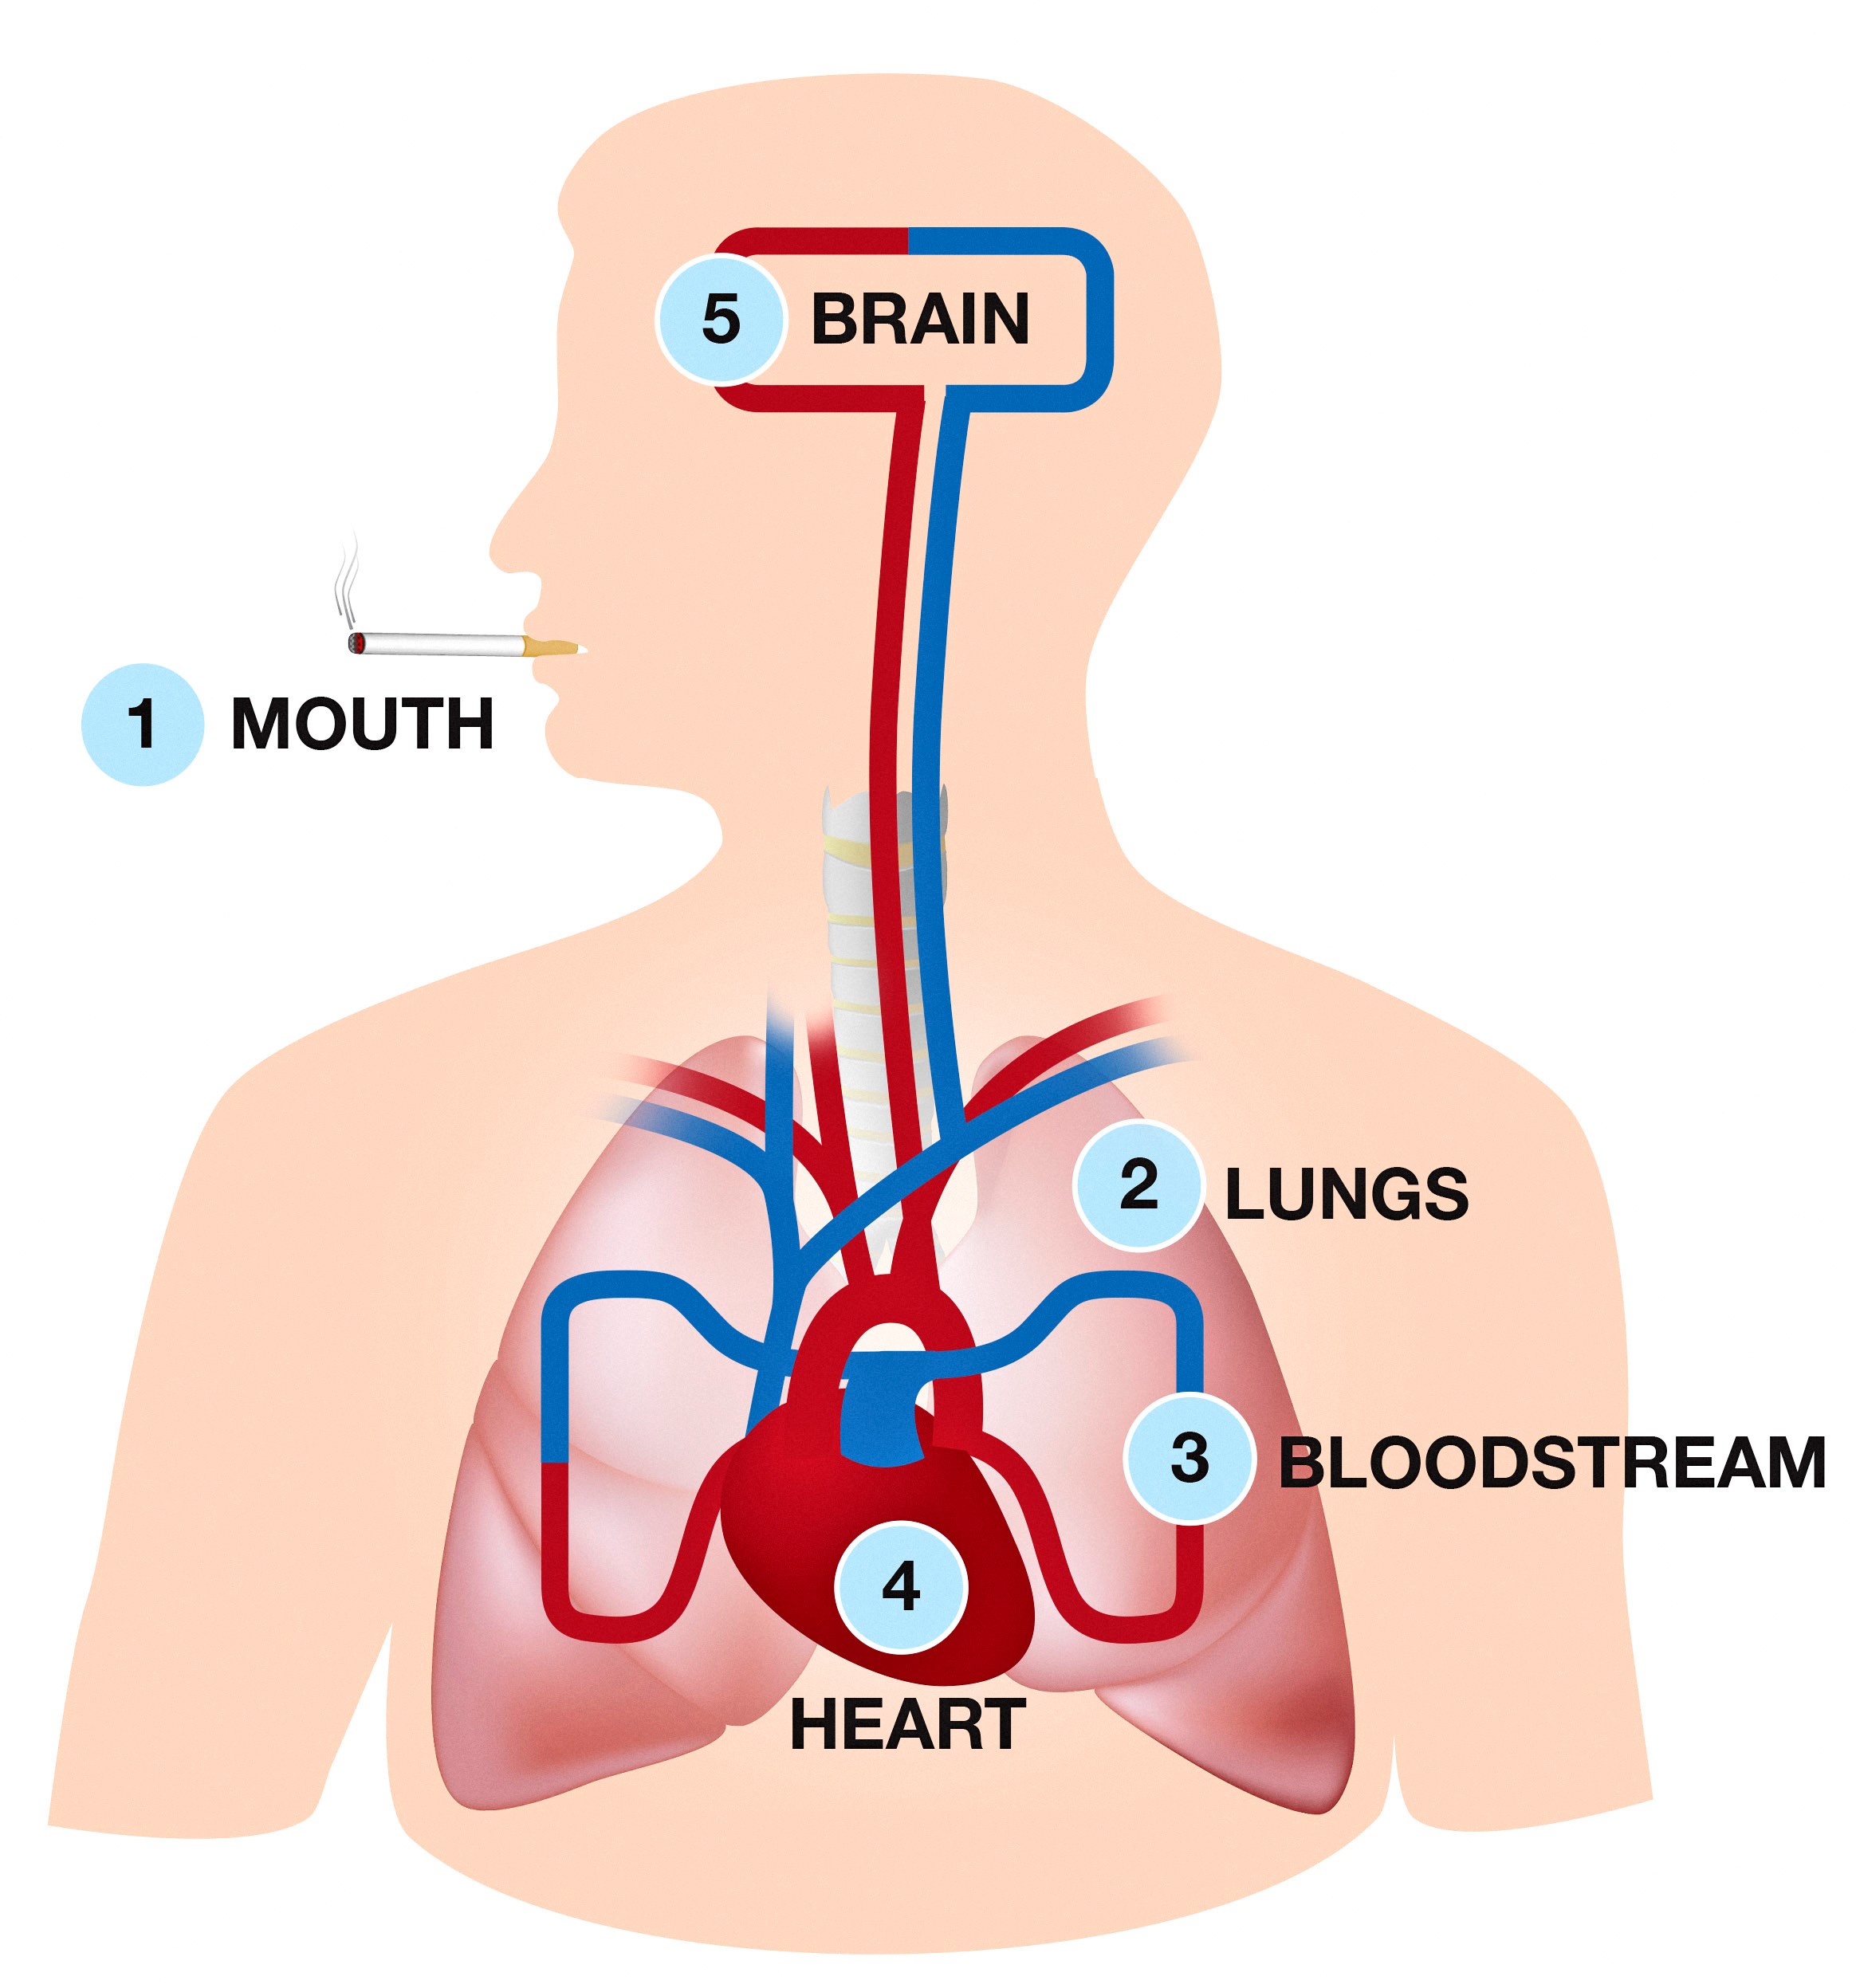 An illustration showing how the body processes nicotine. 